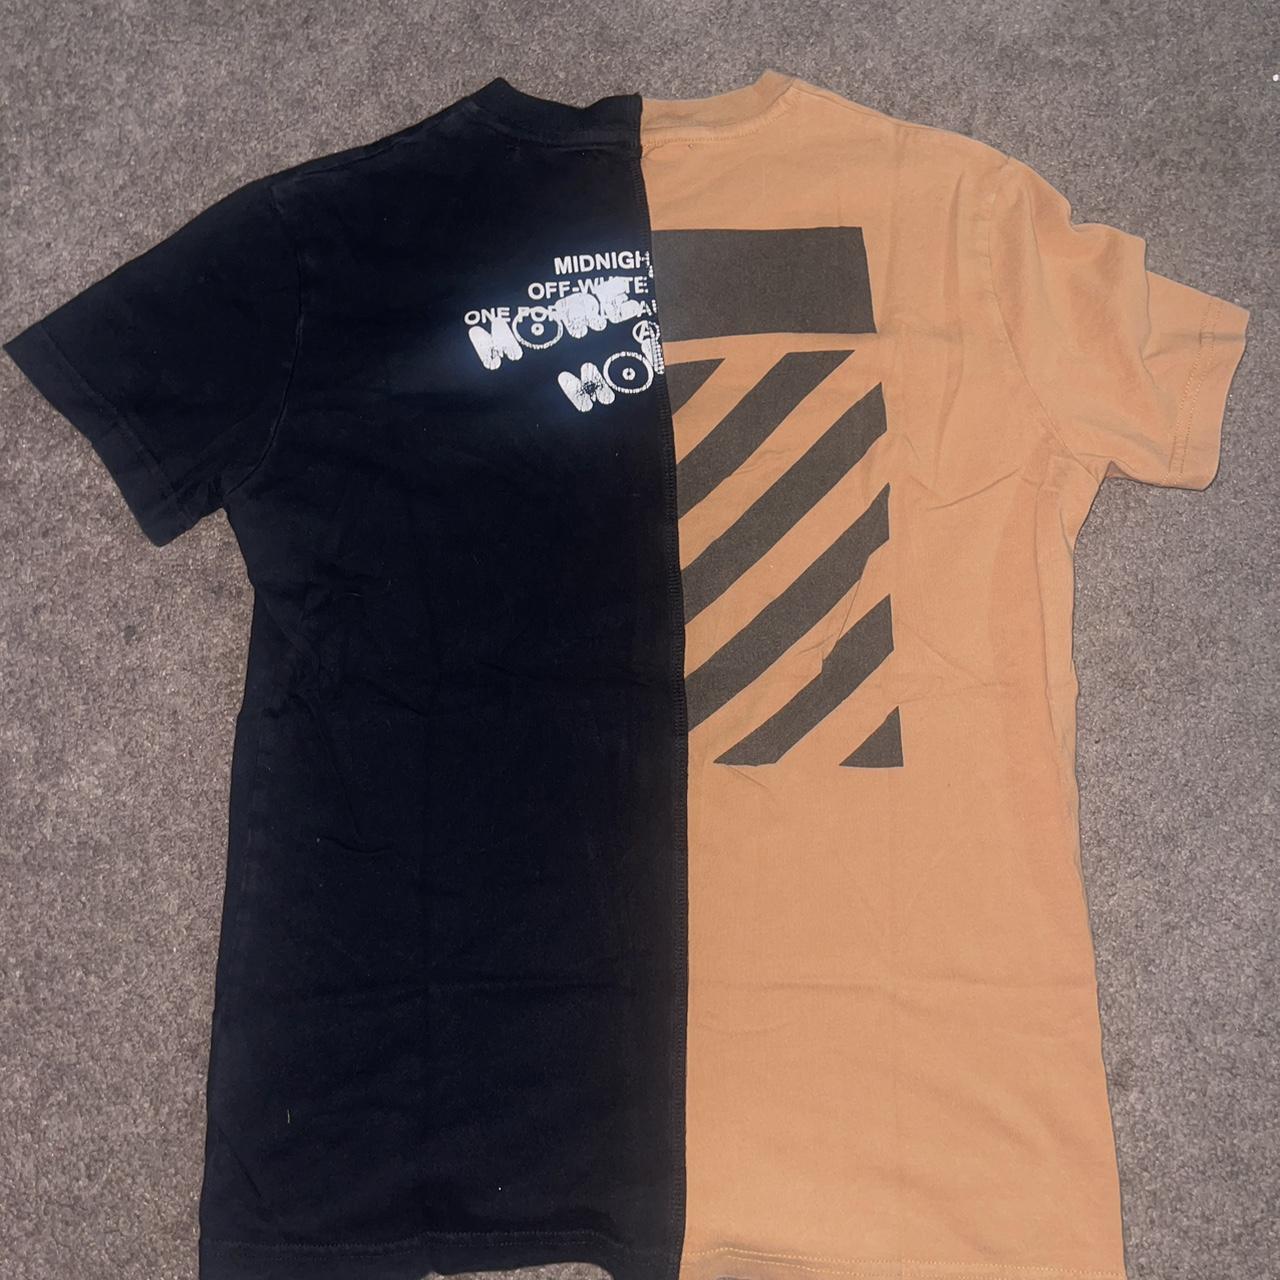 Off-White Tshirt Great Fits like a... - Depop